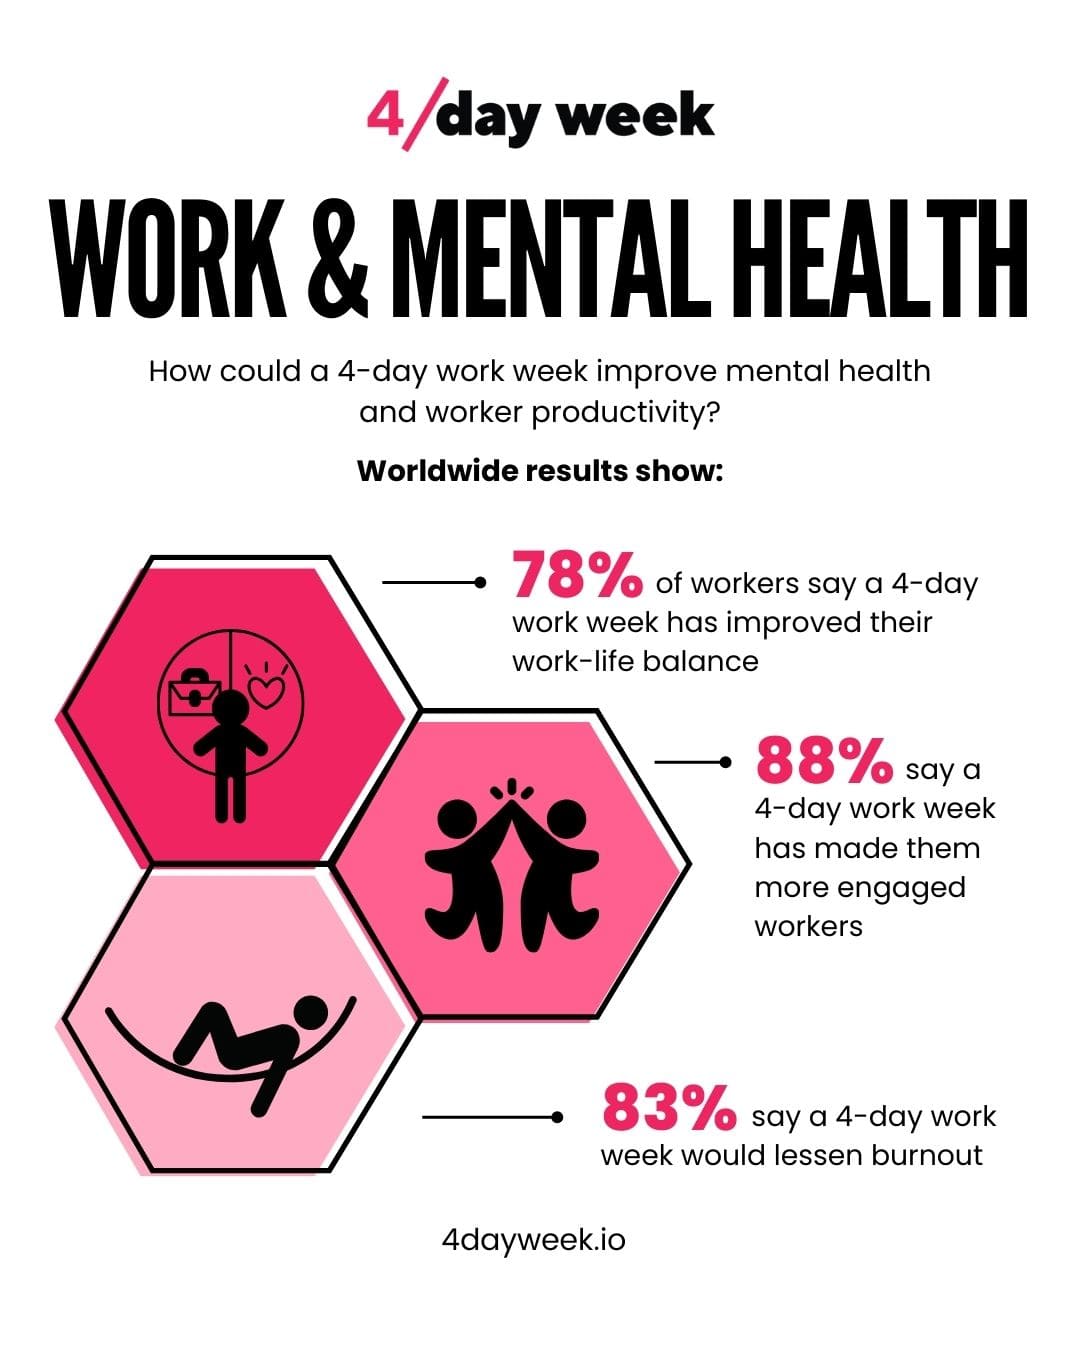 Work &amp; Mental Health: The Power of a 4-Day Workweek